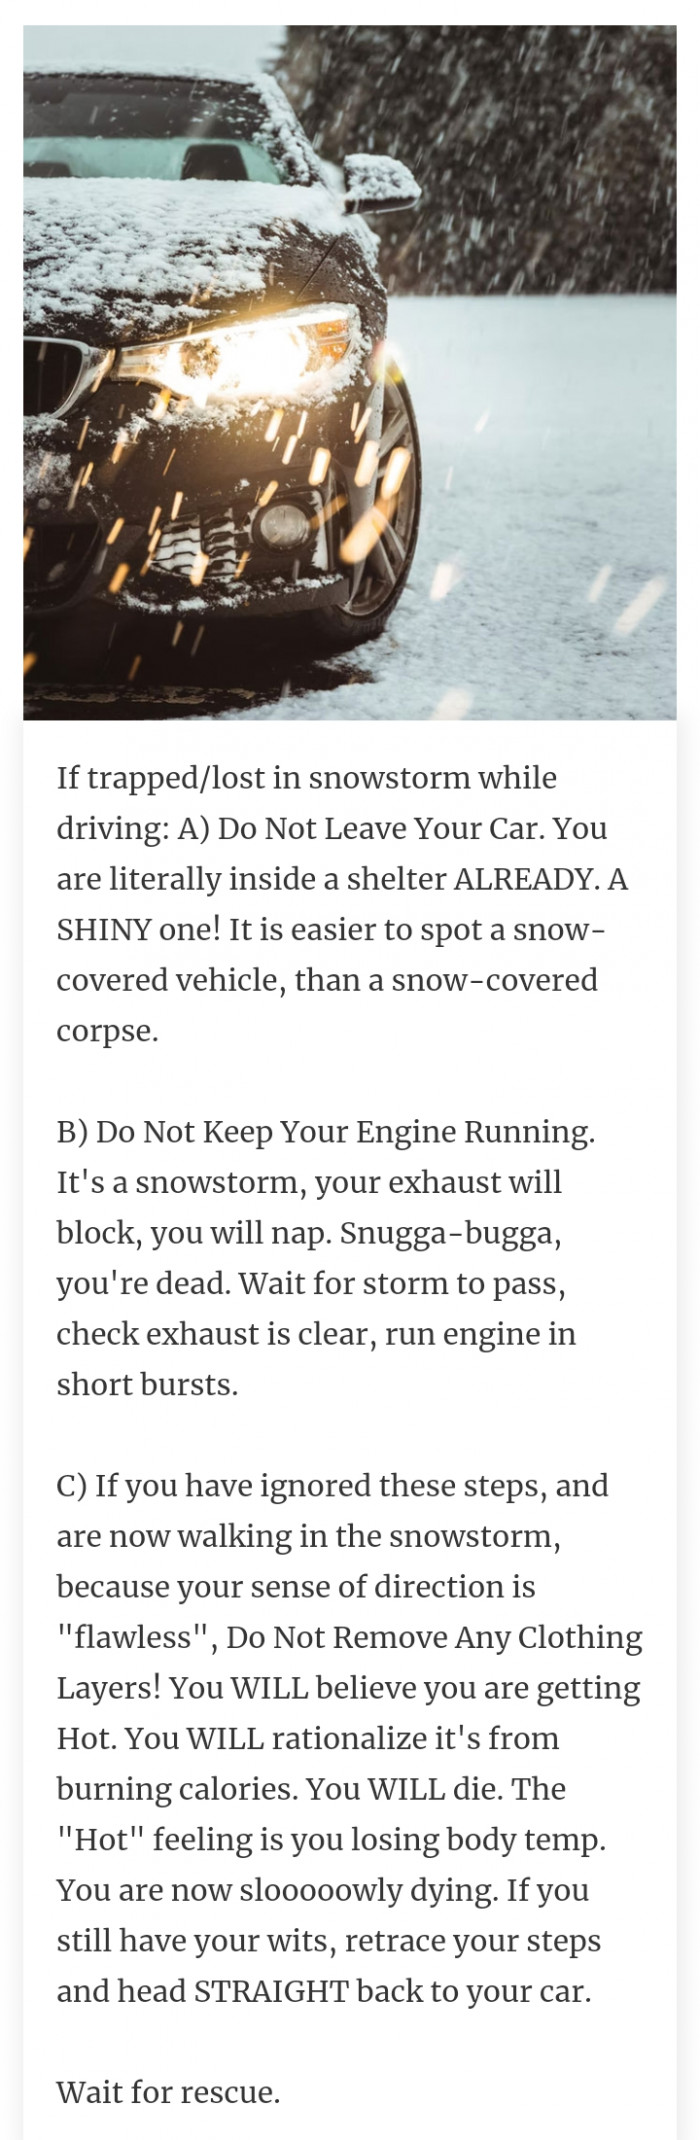 #5 If you're trapped in a snowstorm while driving.